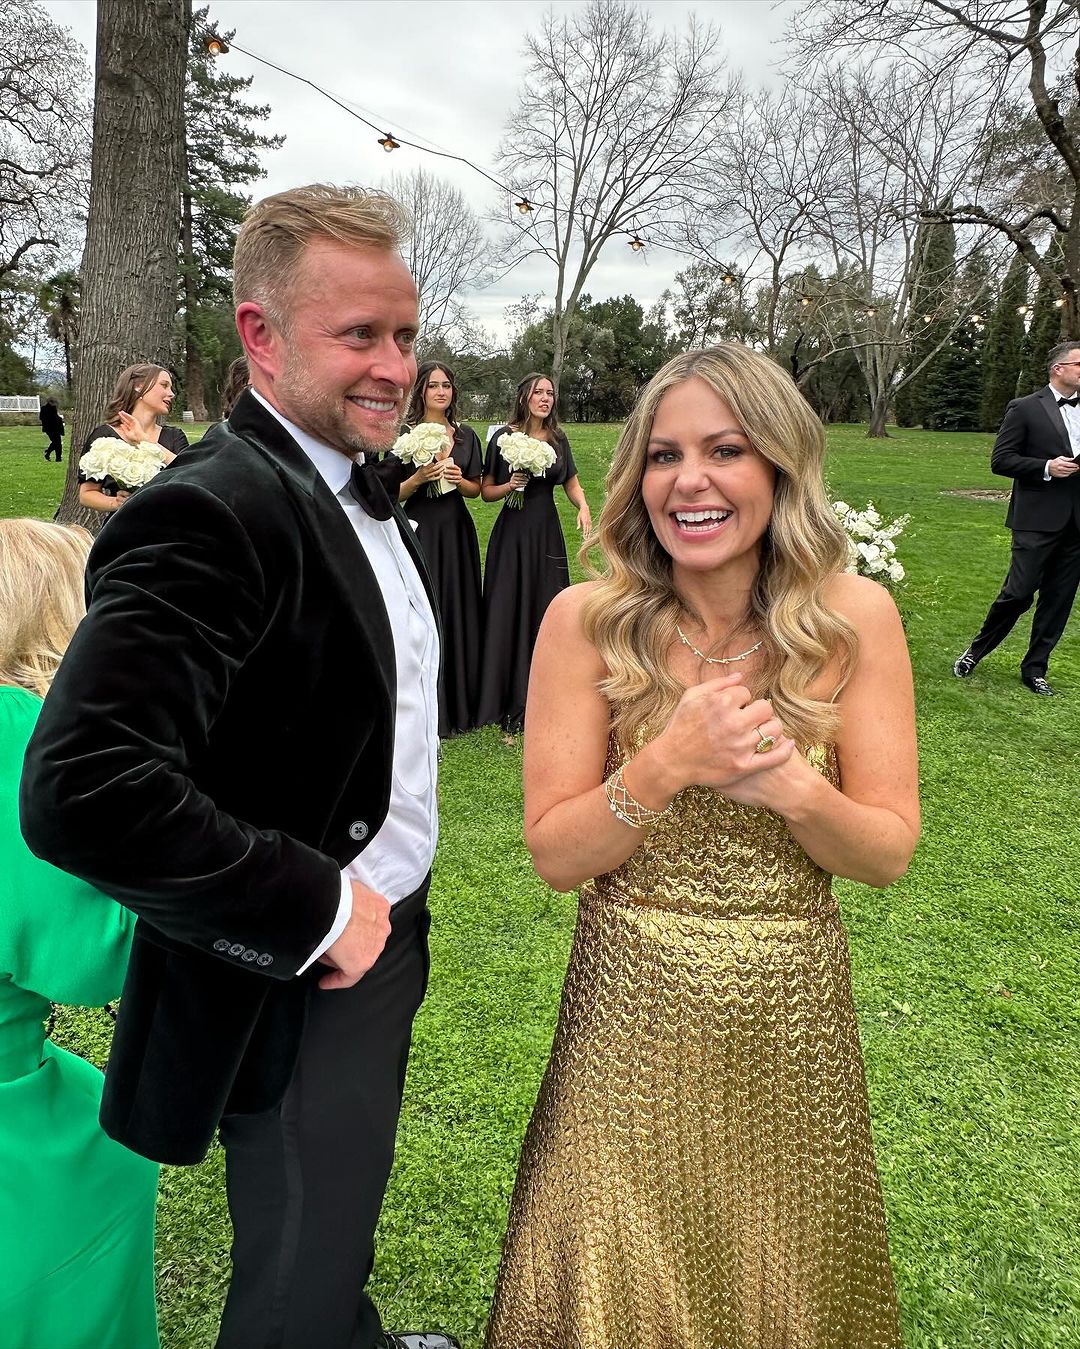 Candace Cameron Bure and her husband Valeri Bure during their son Lev's wedding ceremony, dated January 2024 | Source: Instagram/candacecbure